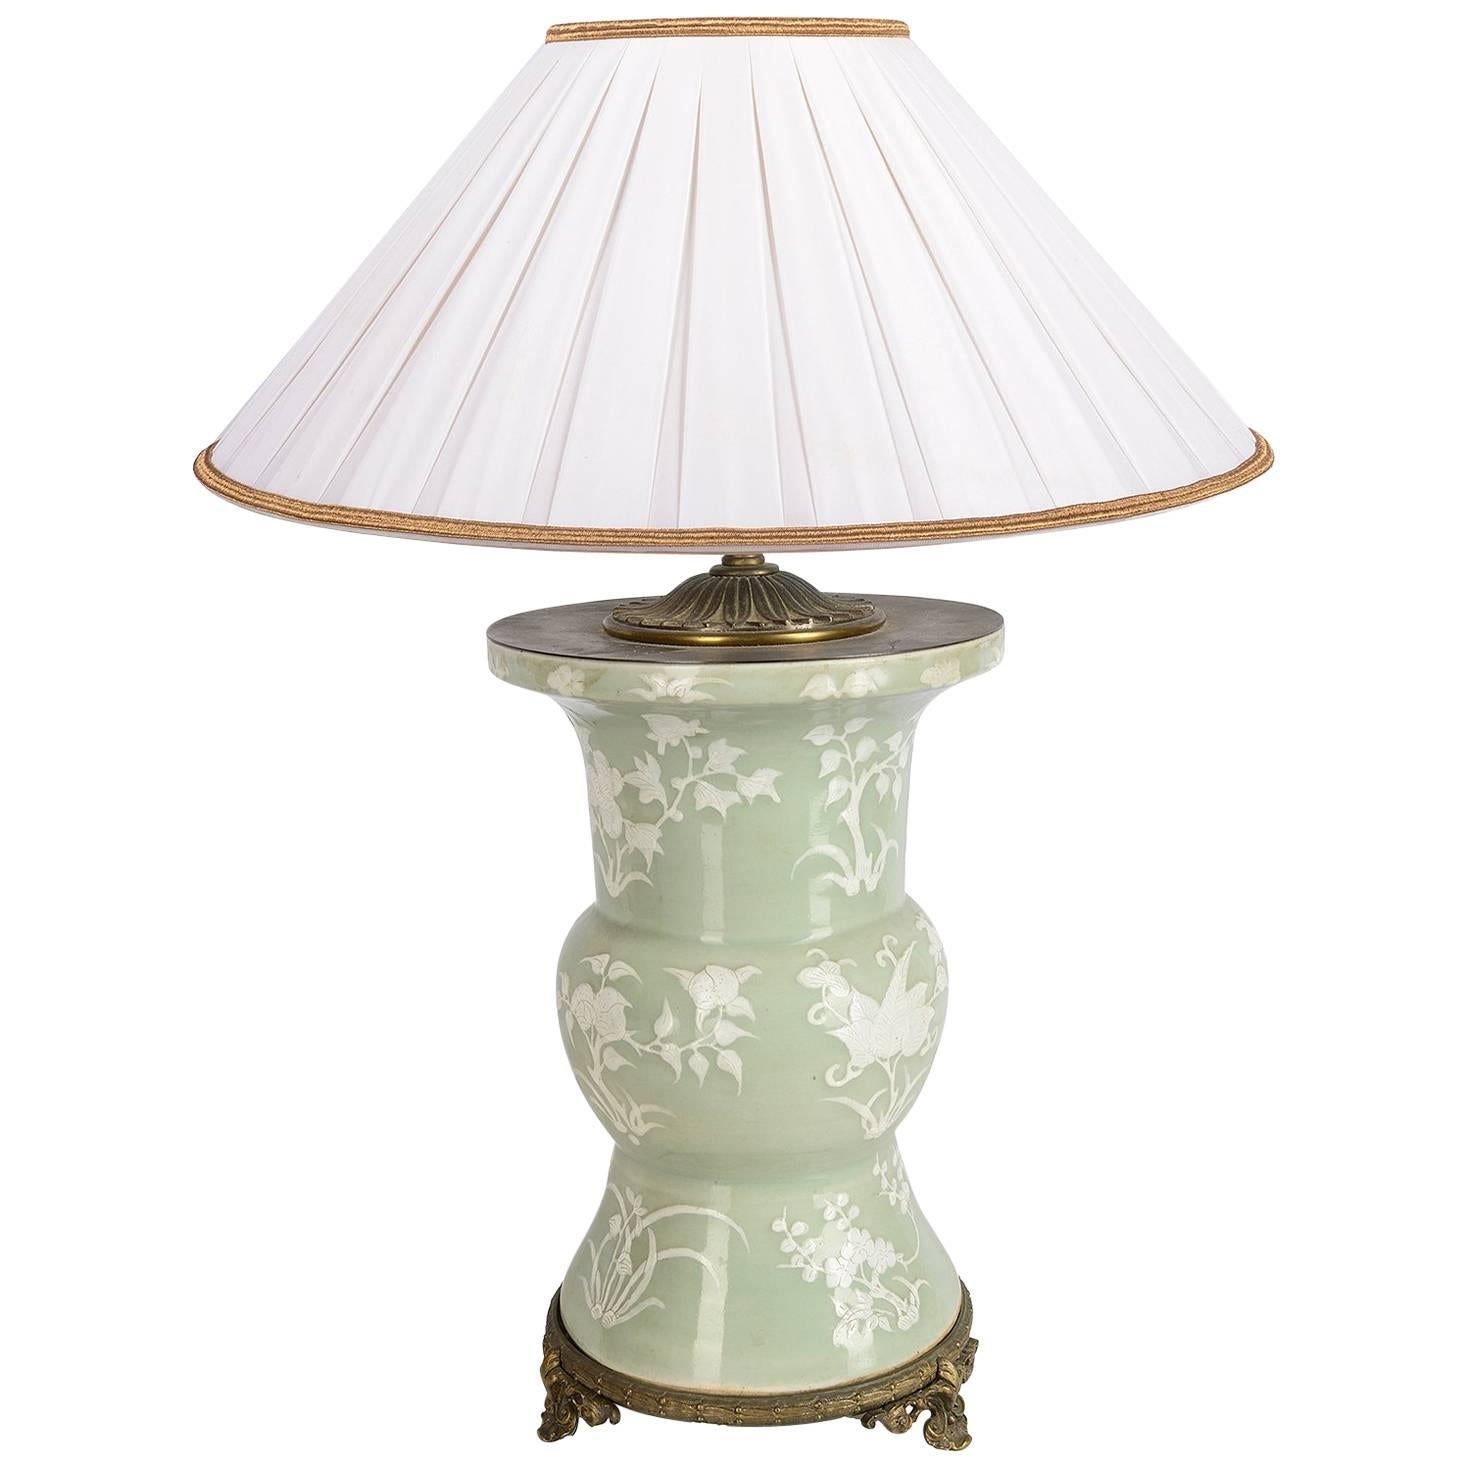 19th Century Chinese Celadon Lave or Lamp For Sale